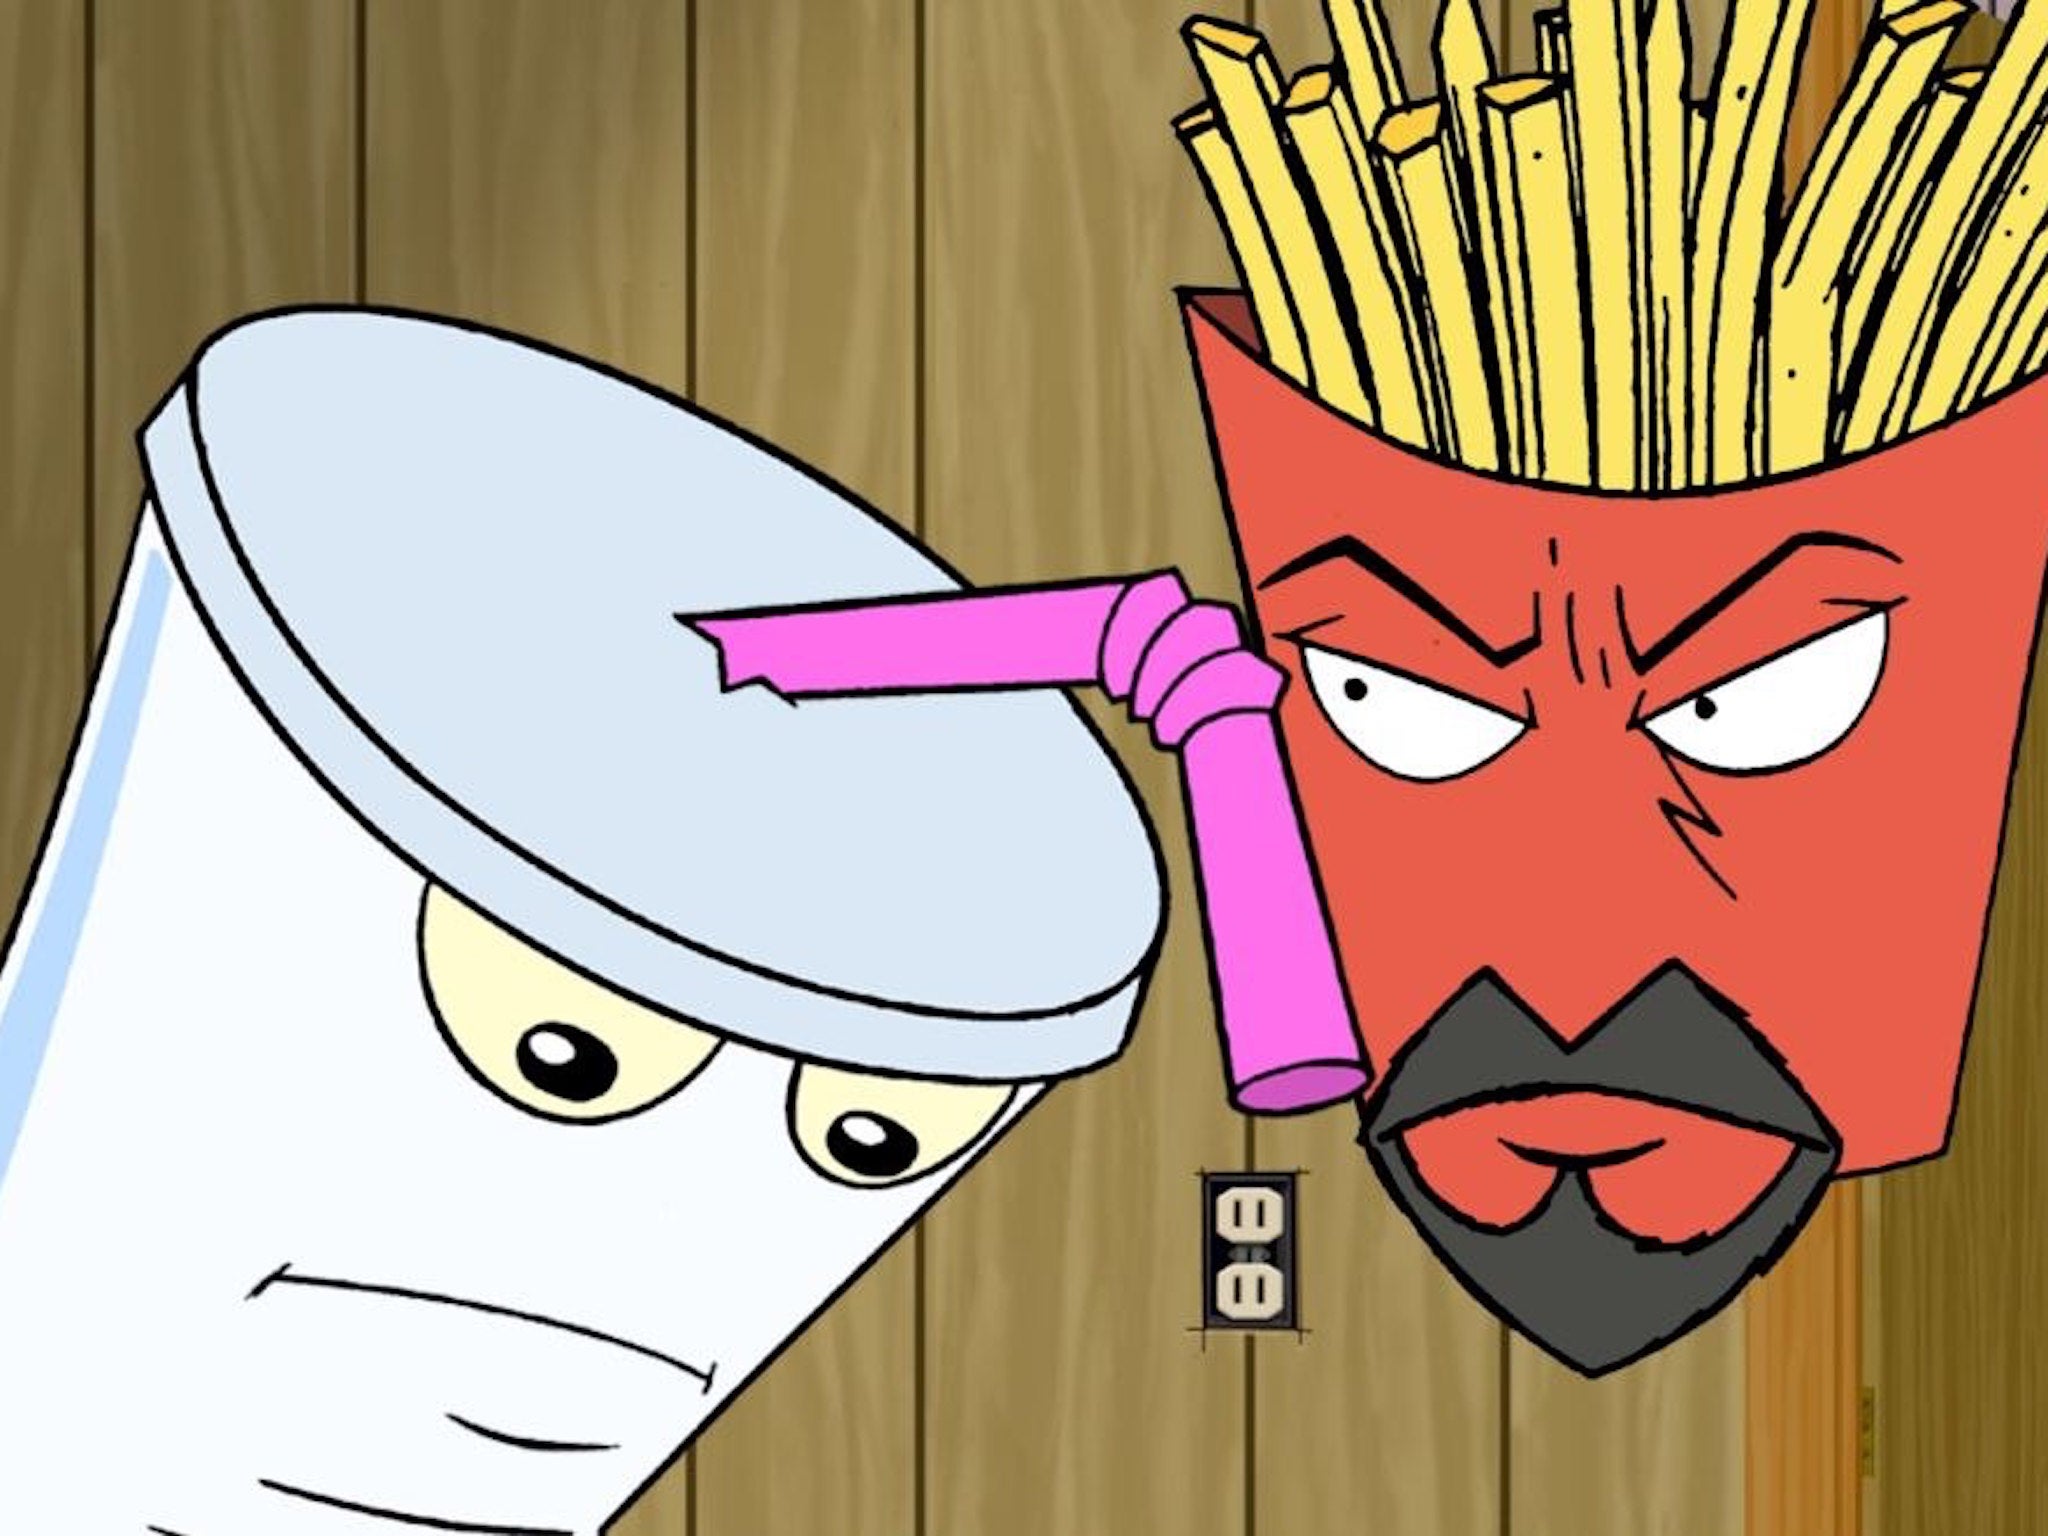 The 2000 animation ‘Aqua Teen Hunger Force’ is among the shows to have episodes pulled by Adult Swim